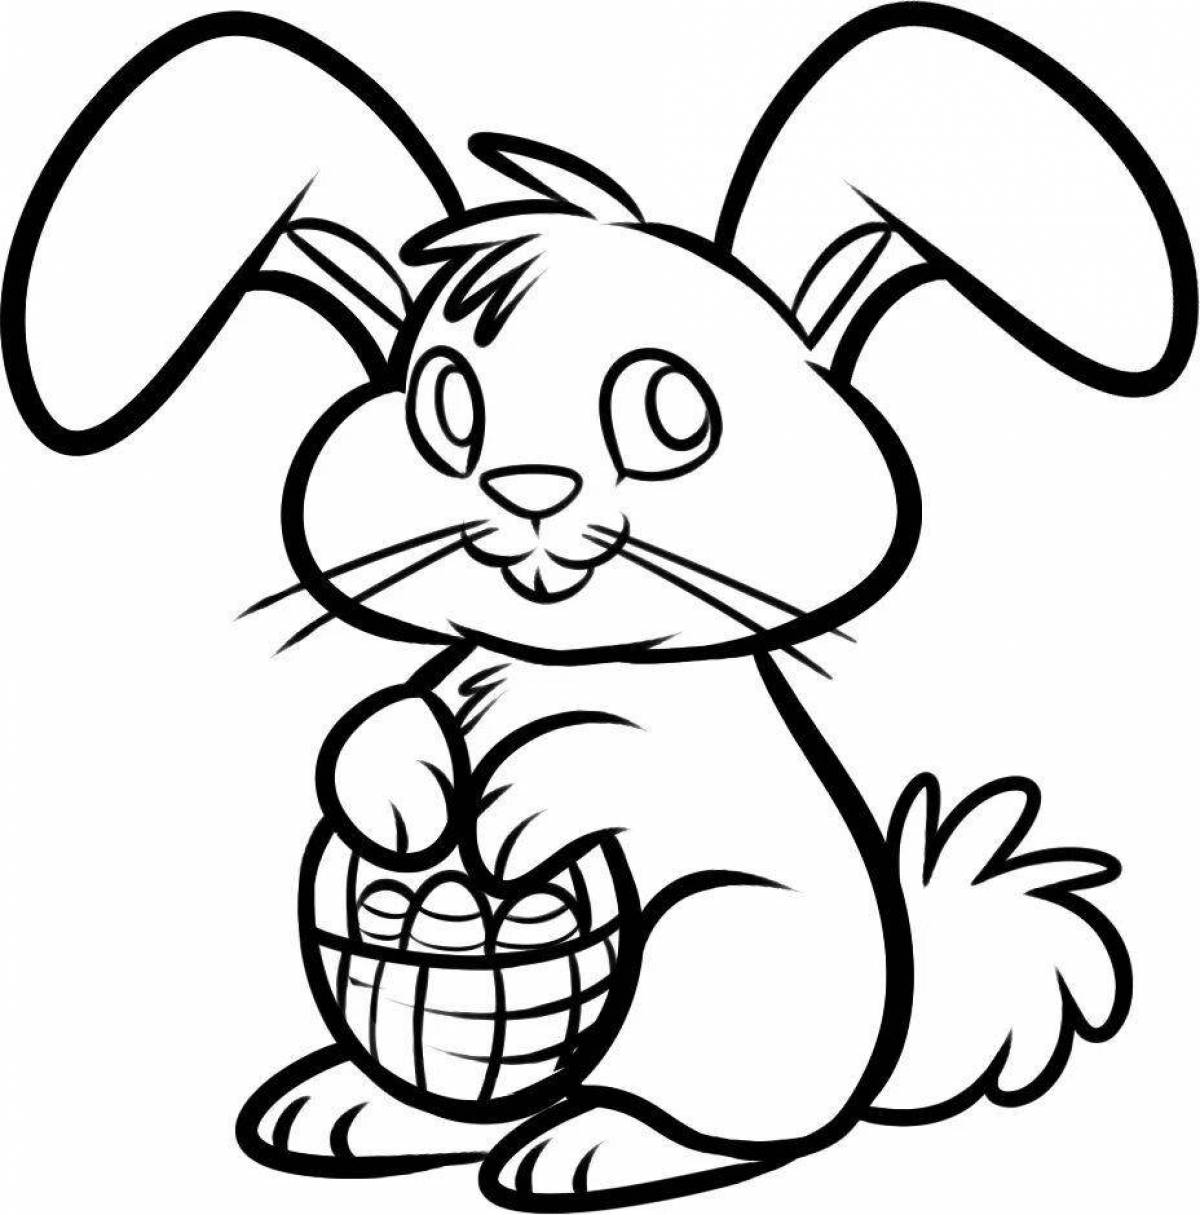 Coloring live cat and rabbit